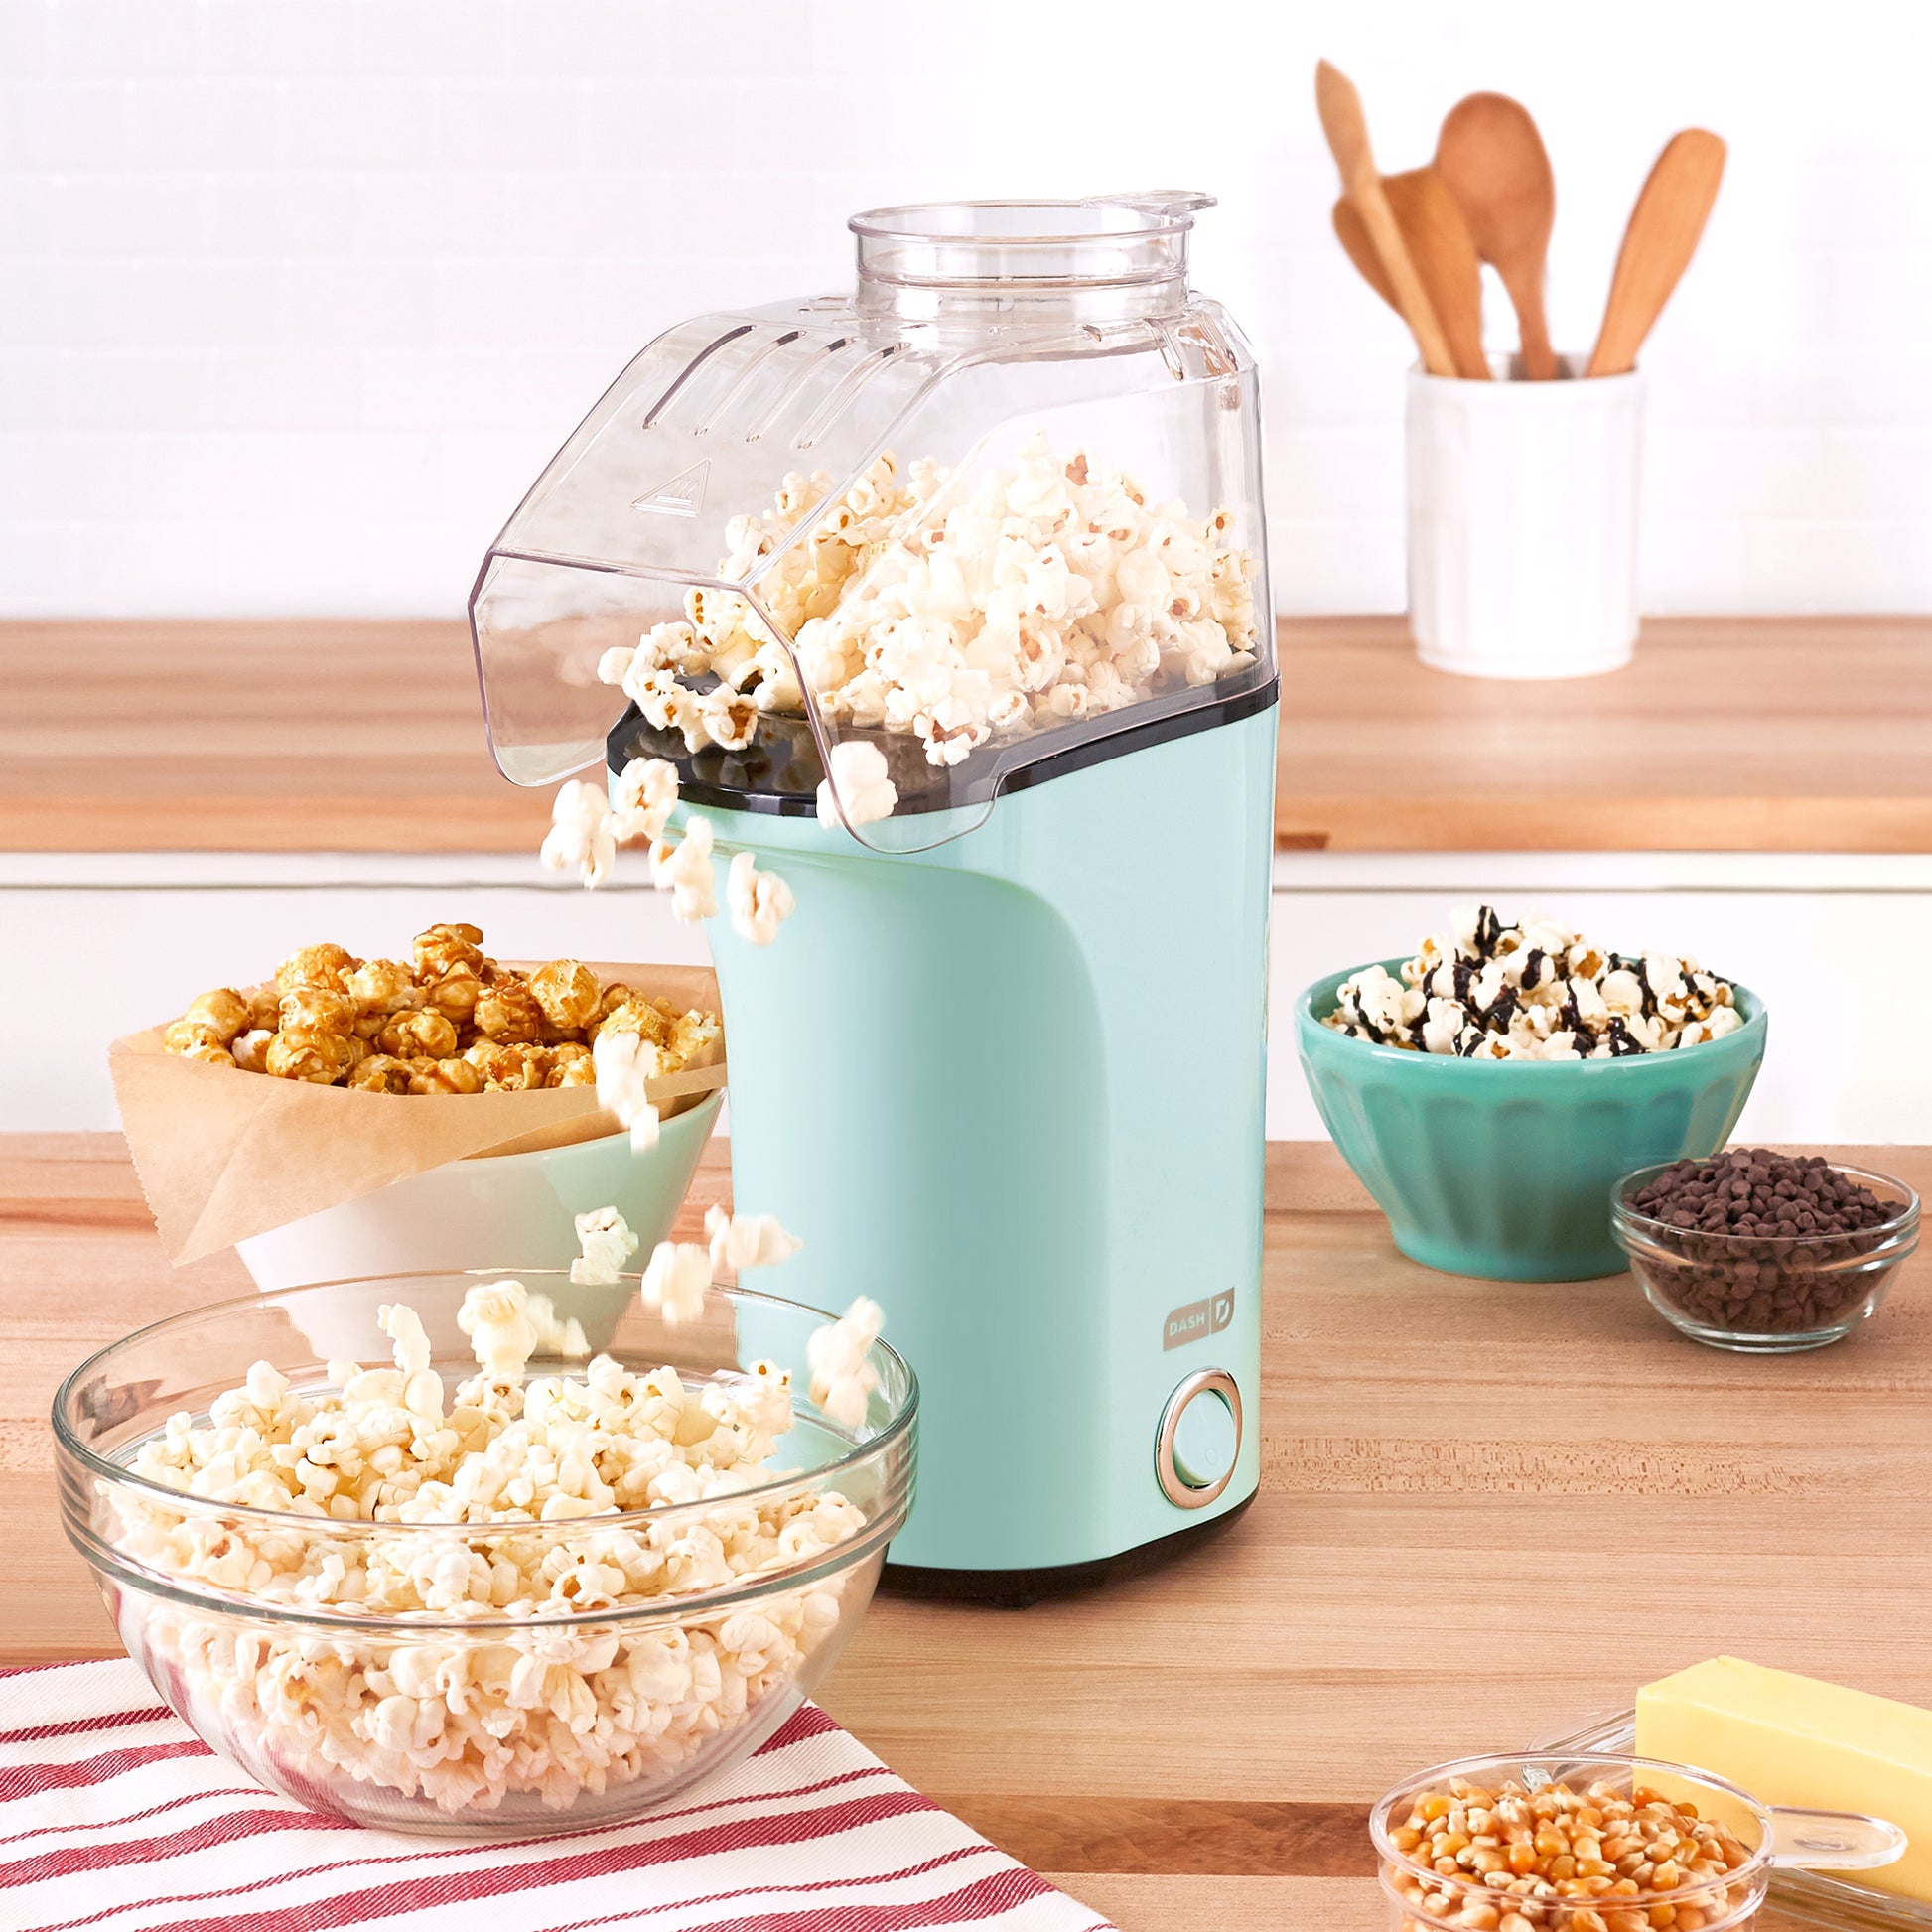 The 5 Best Popcorn Poppers